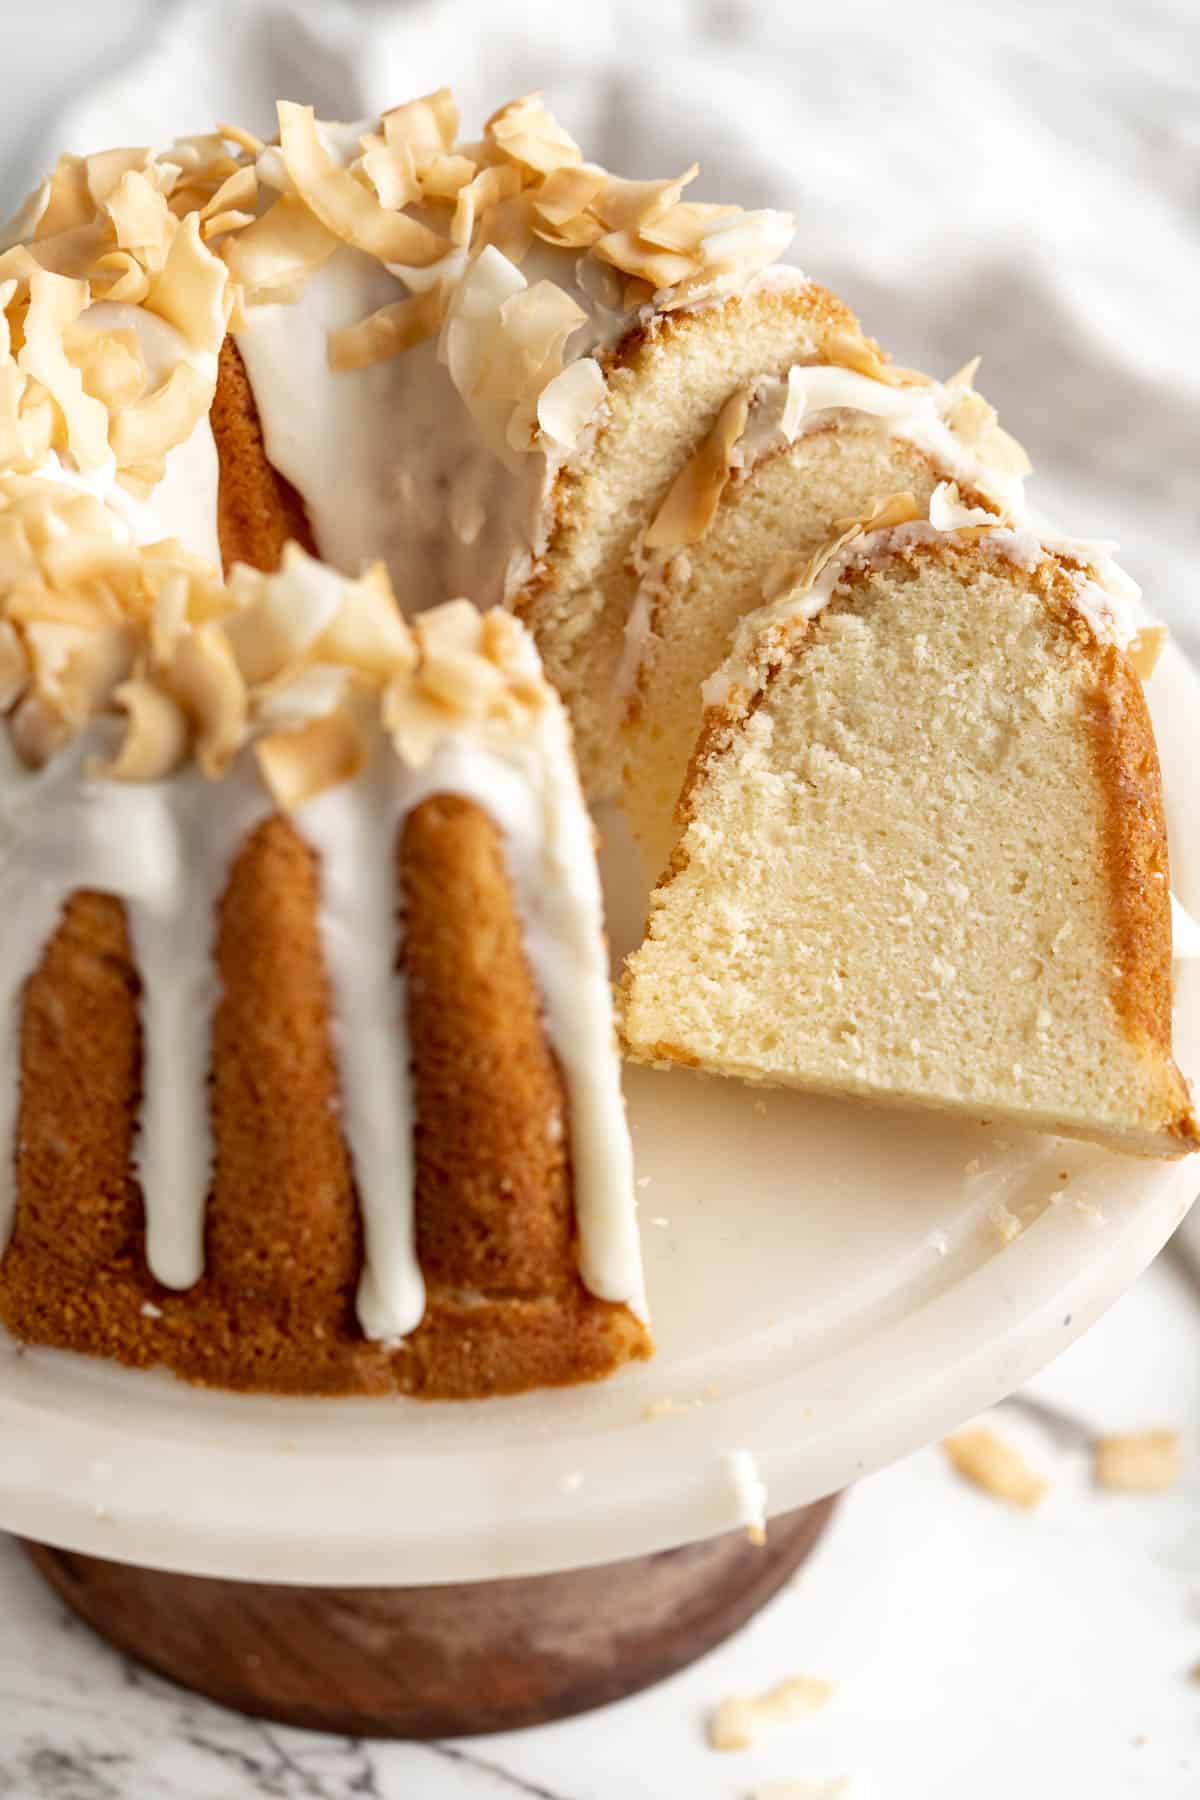 Coconut pound cake with slices cut sitting on a white cake stand